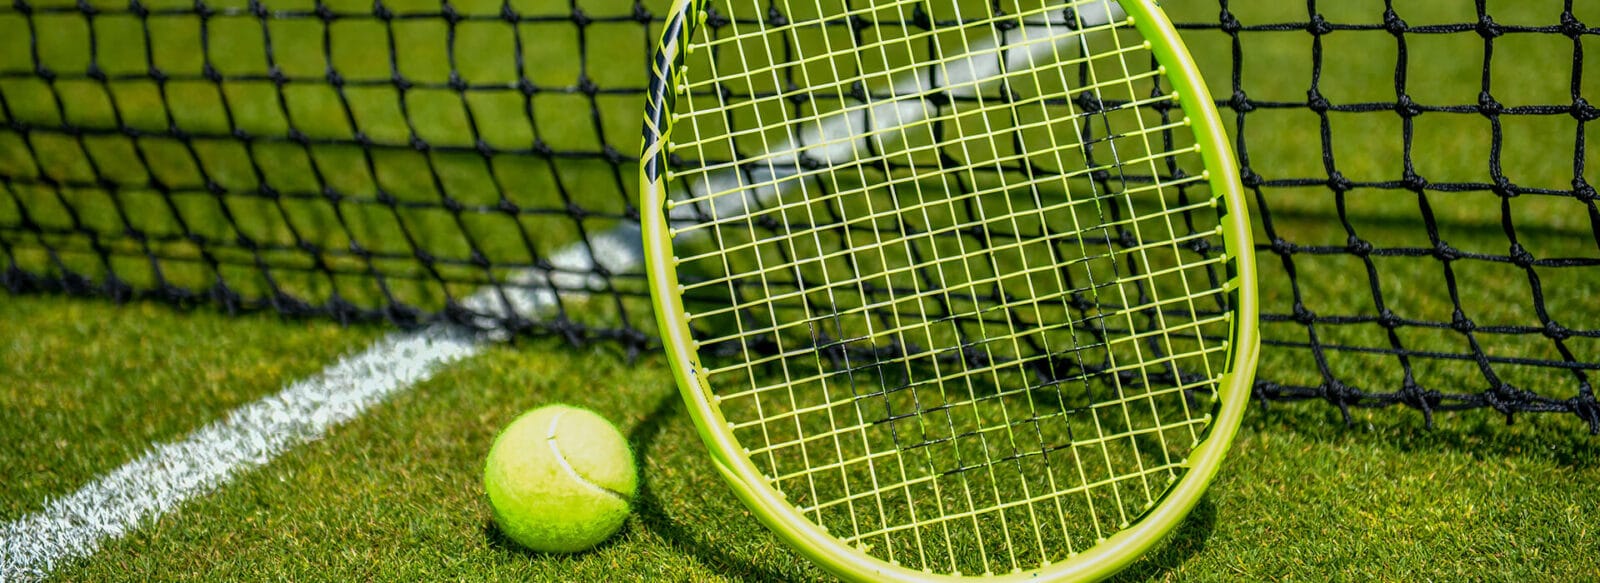 How to Find the Right Tennis Racket for You